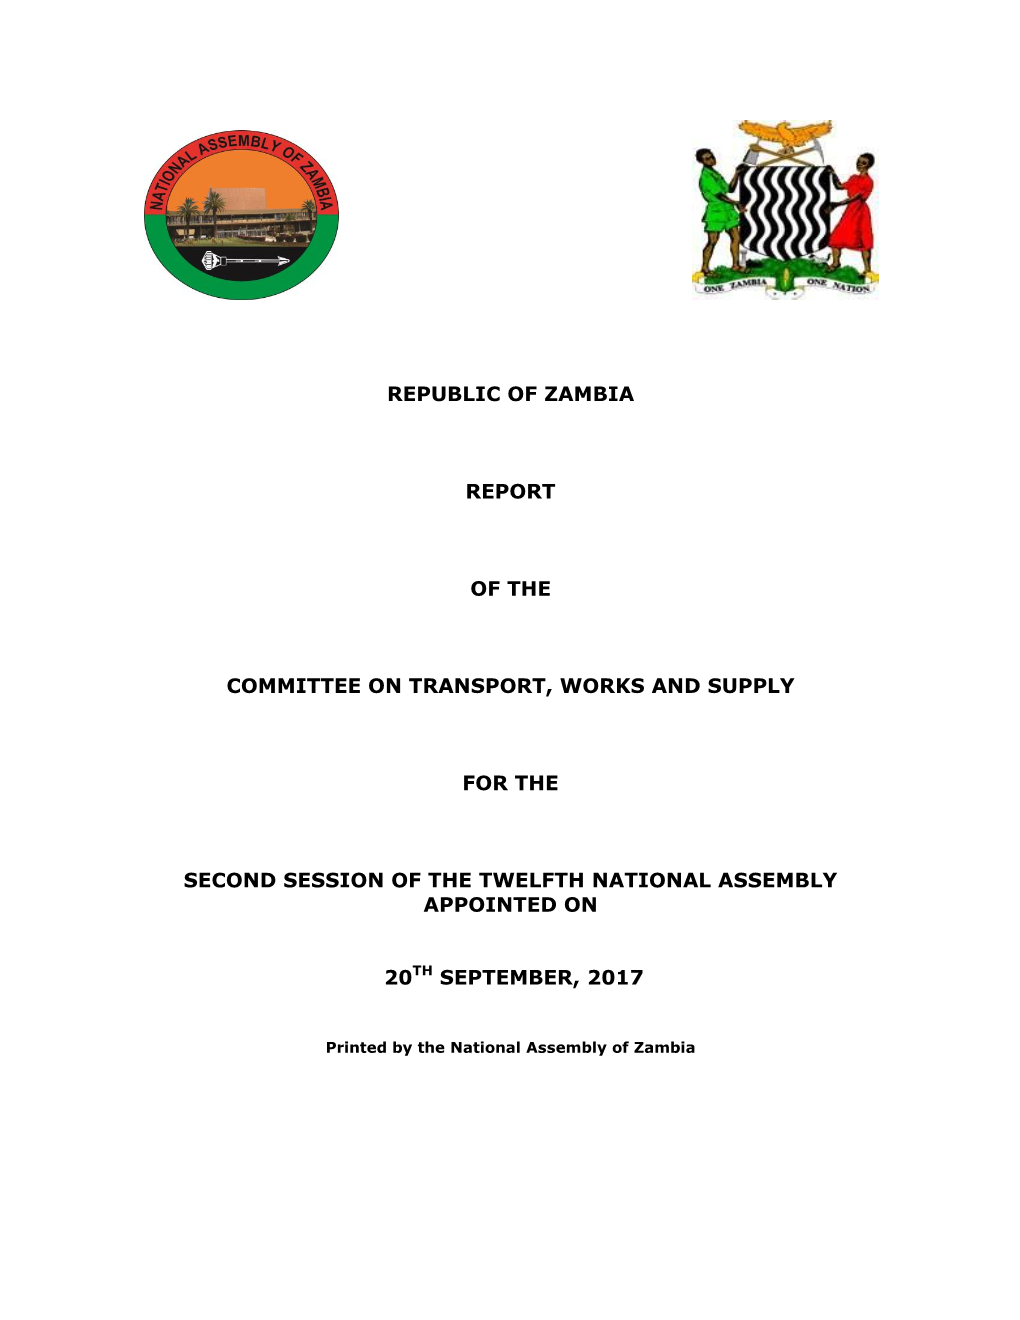 Republic of Zambia Report of the Committee On